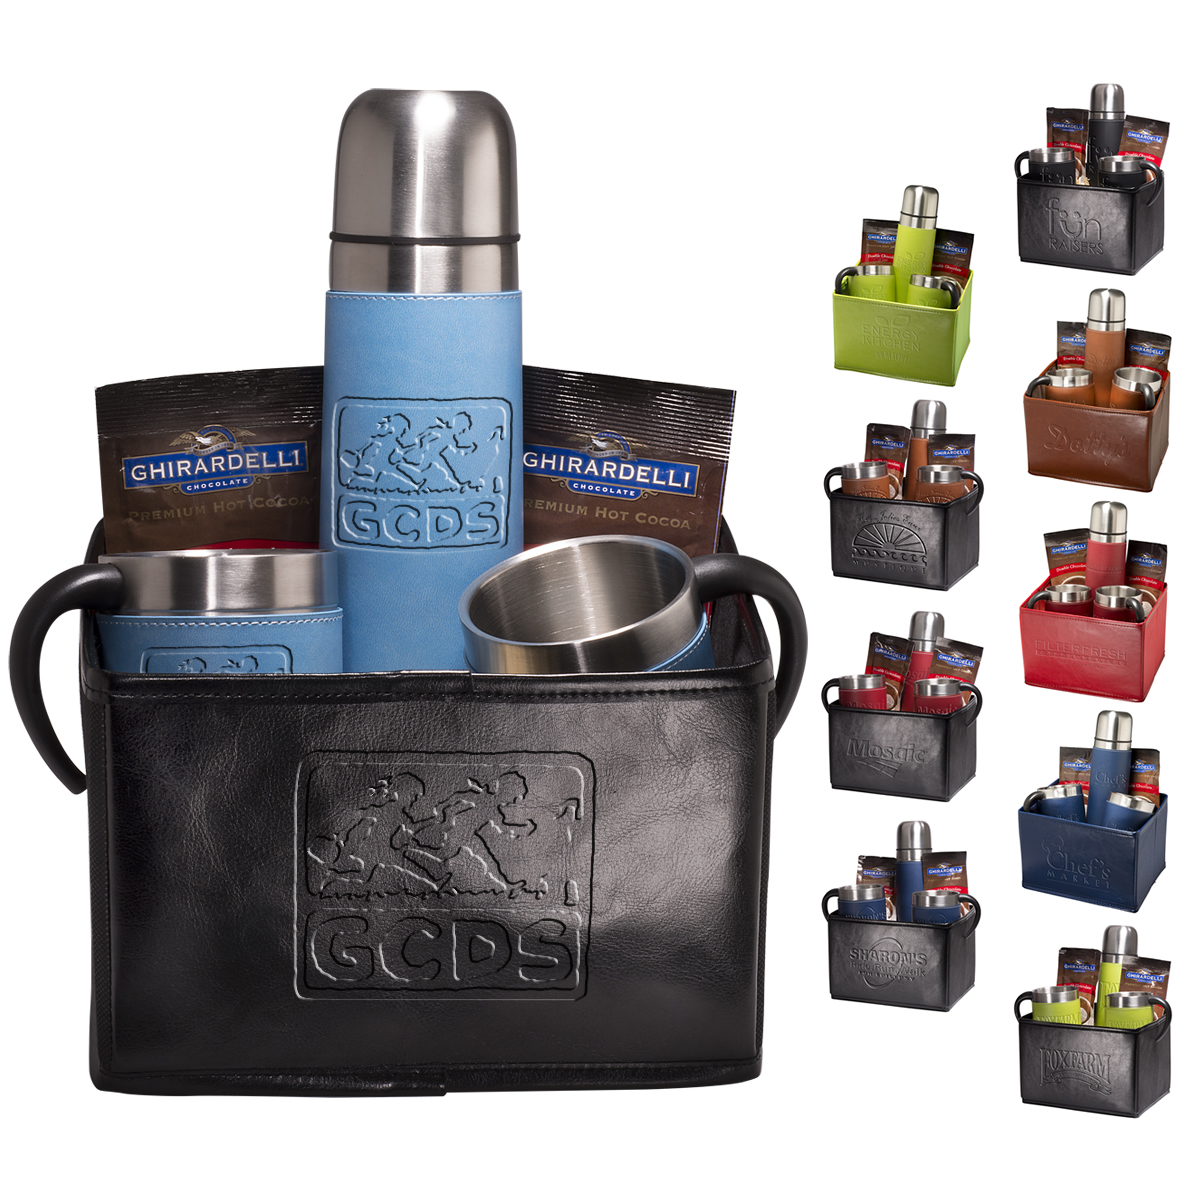 View Image 2 of Logo Tuscany Thermal Bottle, Cups & Ghirardelli® Cocoa Set